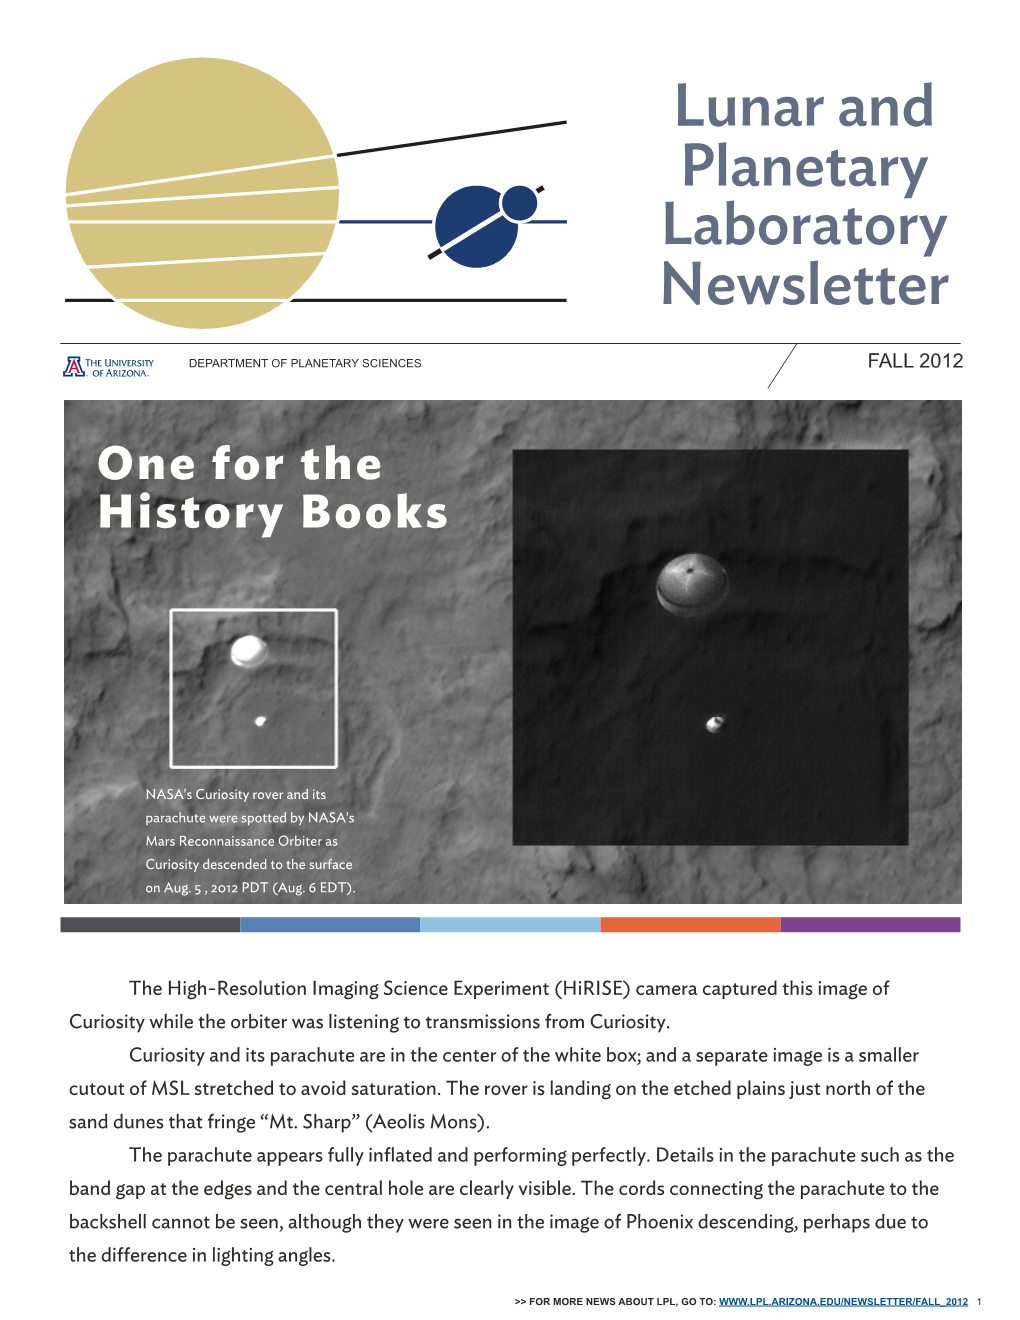 Lunar and Planetary Laboratory Newsletter • Fall 2012 Newsletter Lunar and Planetary Laboratory • Fall 2012 Newsletter